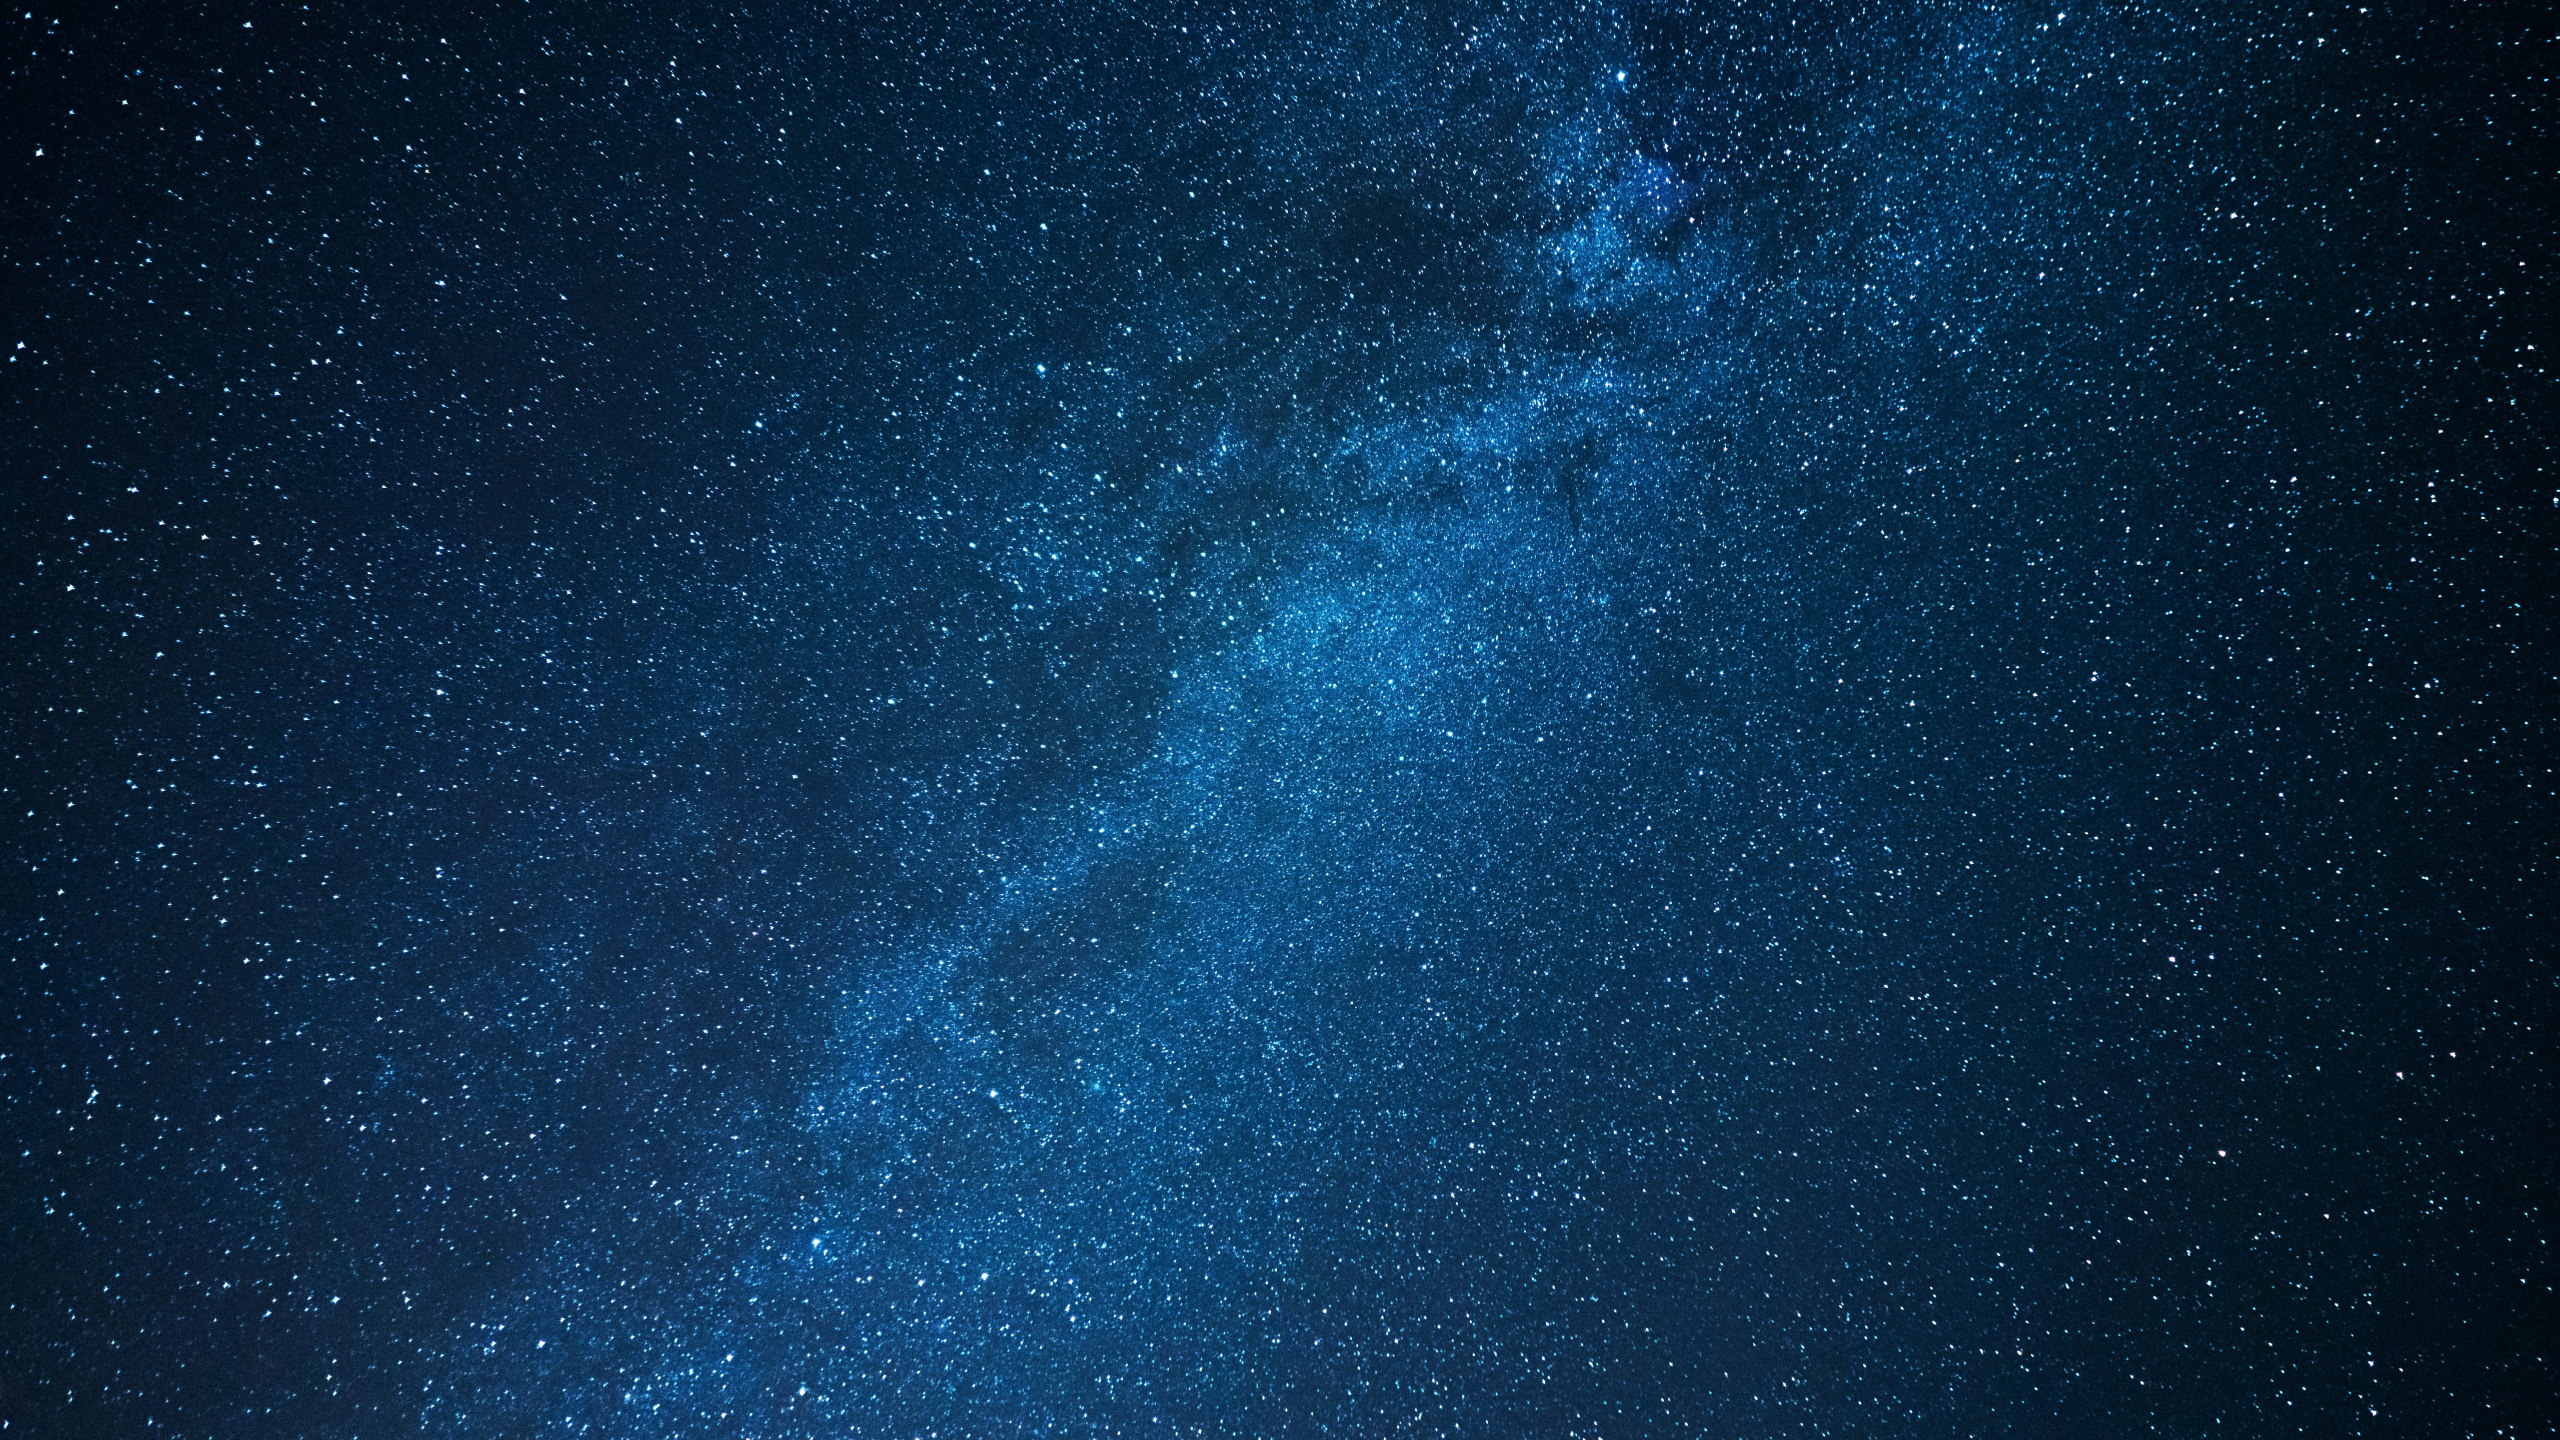 Blue and White Starry Night Sky. Wallpaper in 2560x1440 Resolution